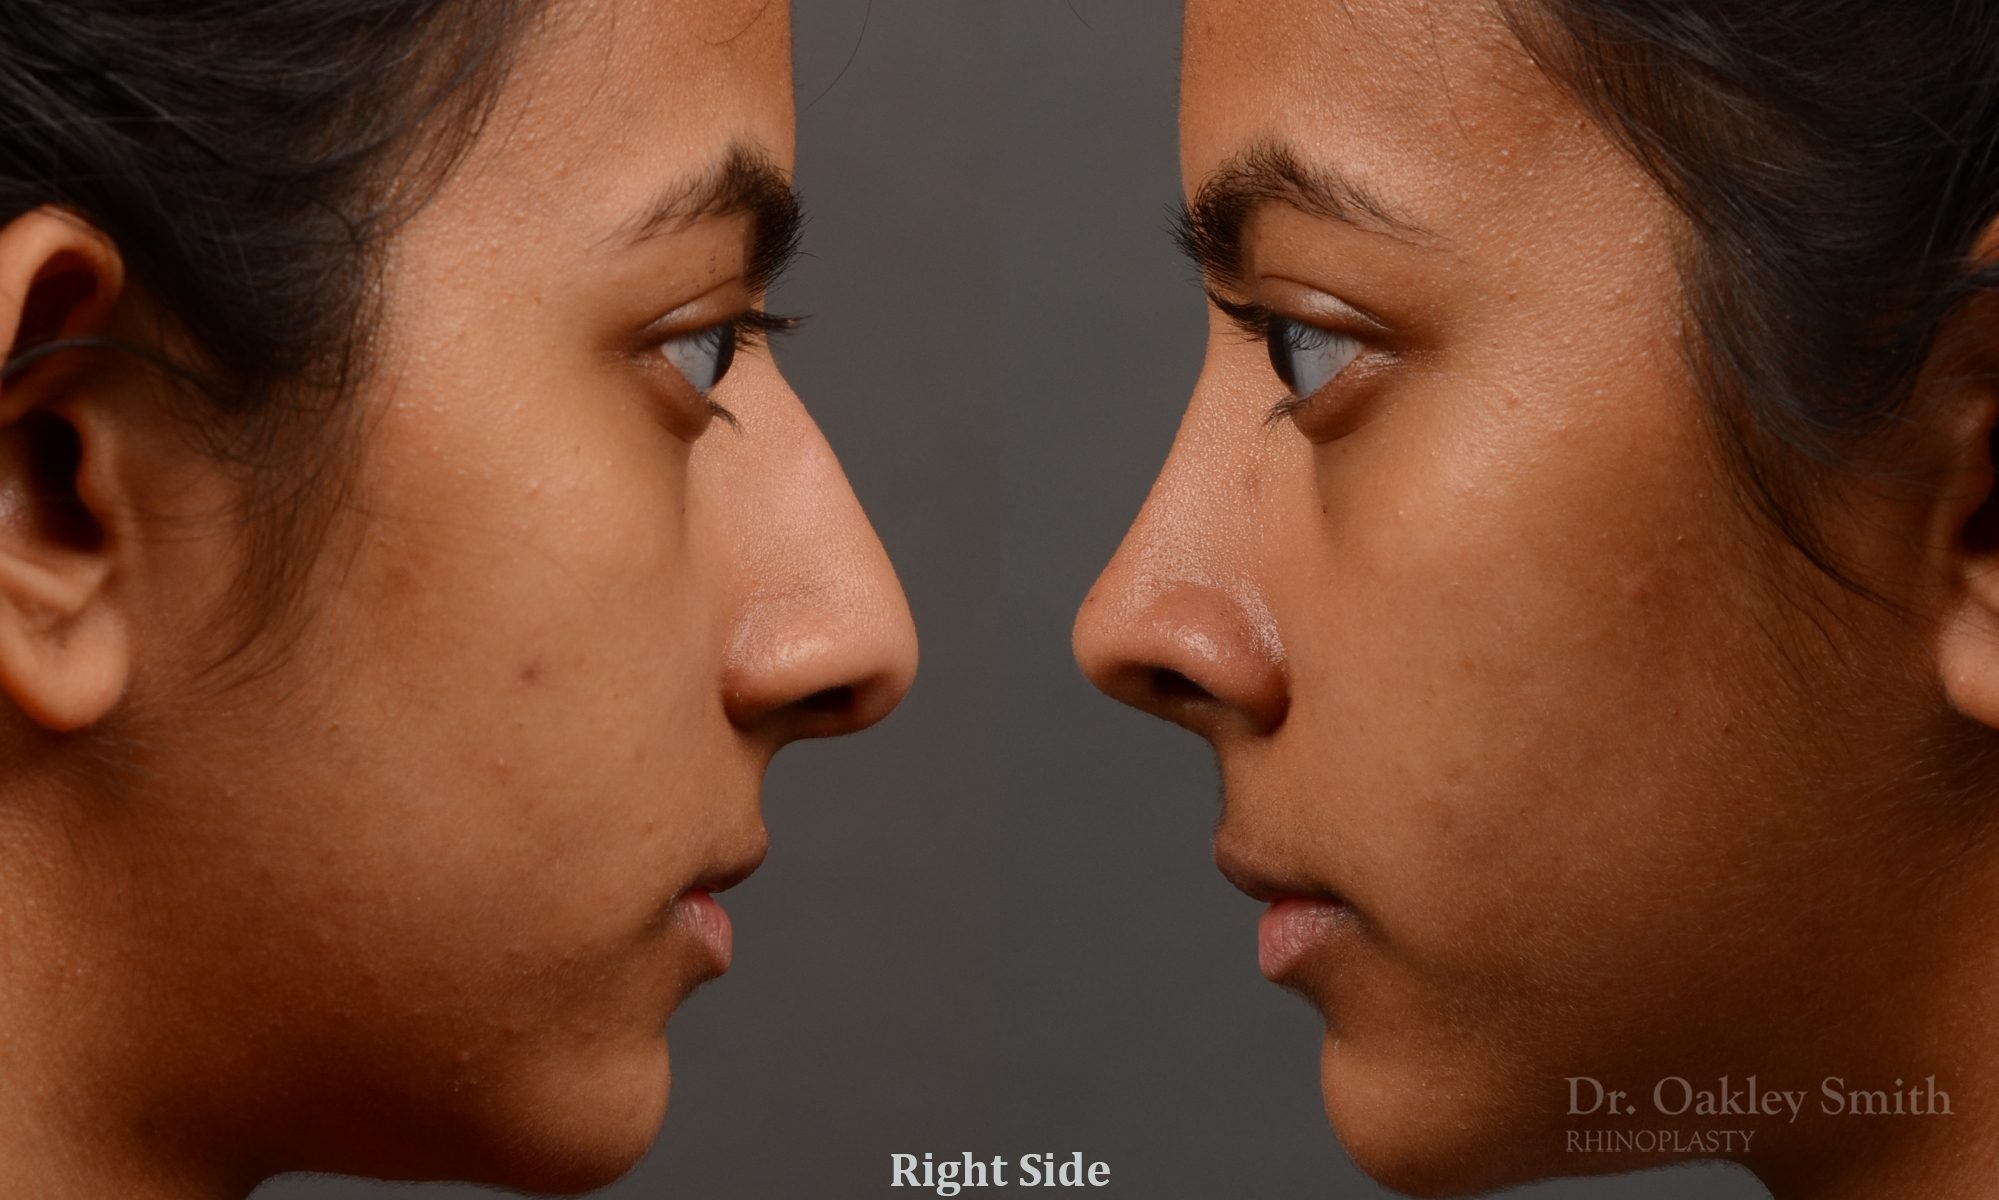 399 - Expert Rhinoplasty nose job surgery to reduce the size of this womans nose.